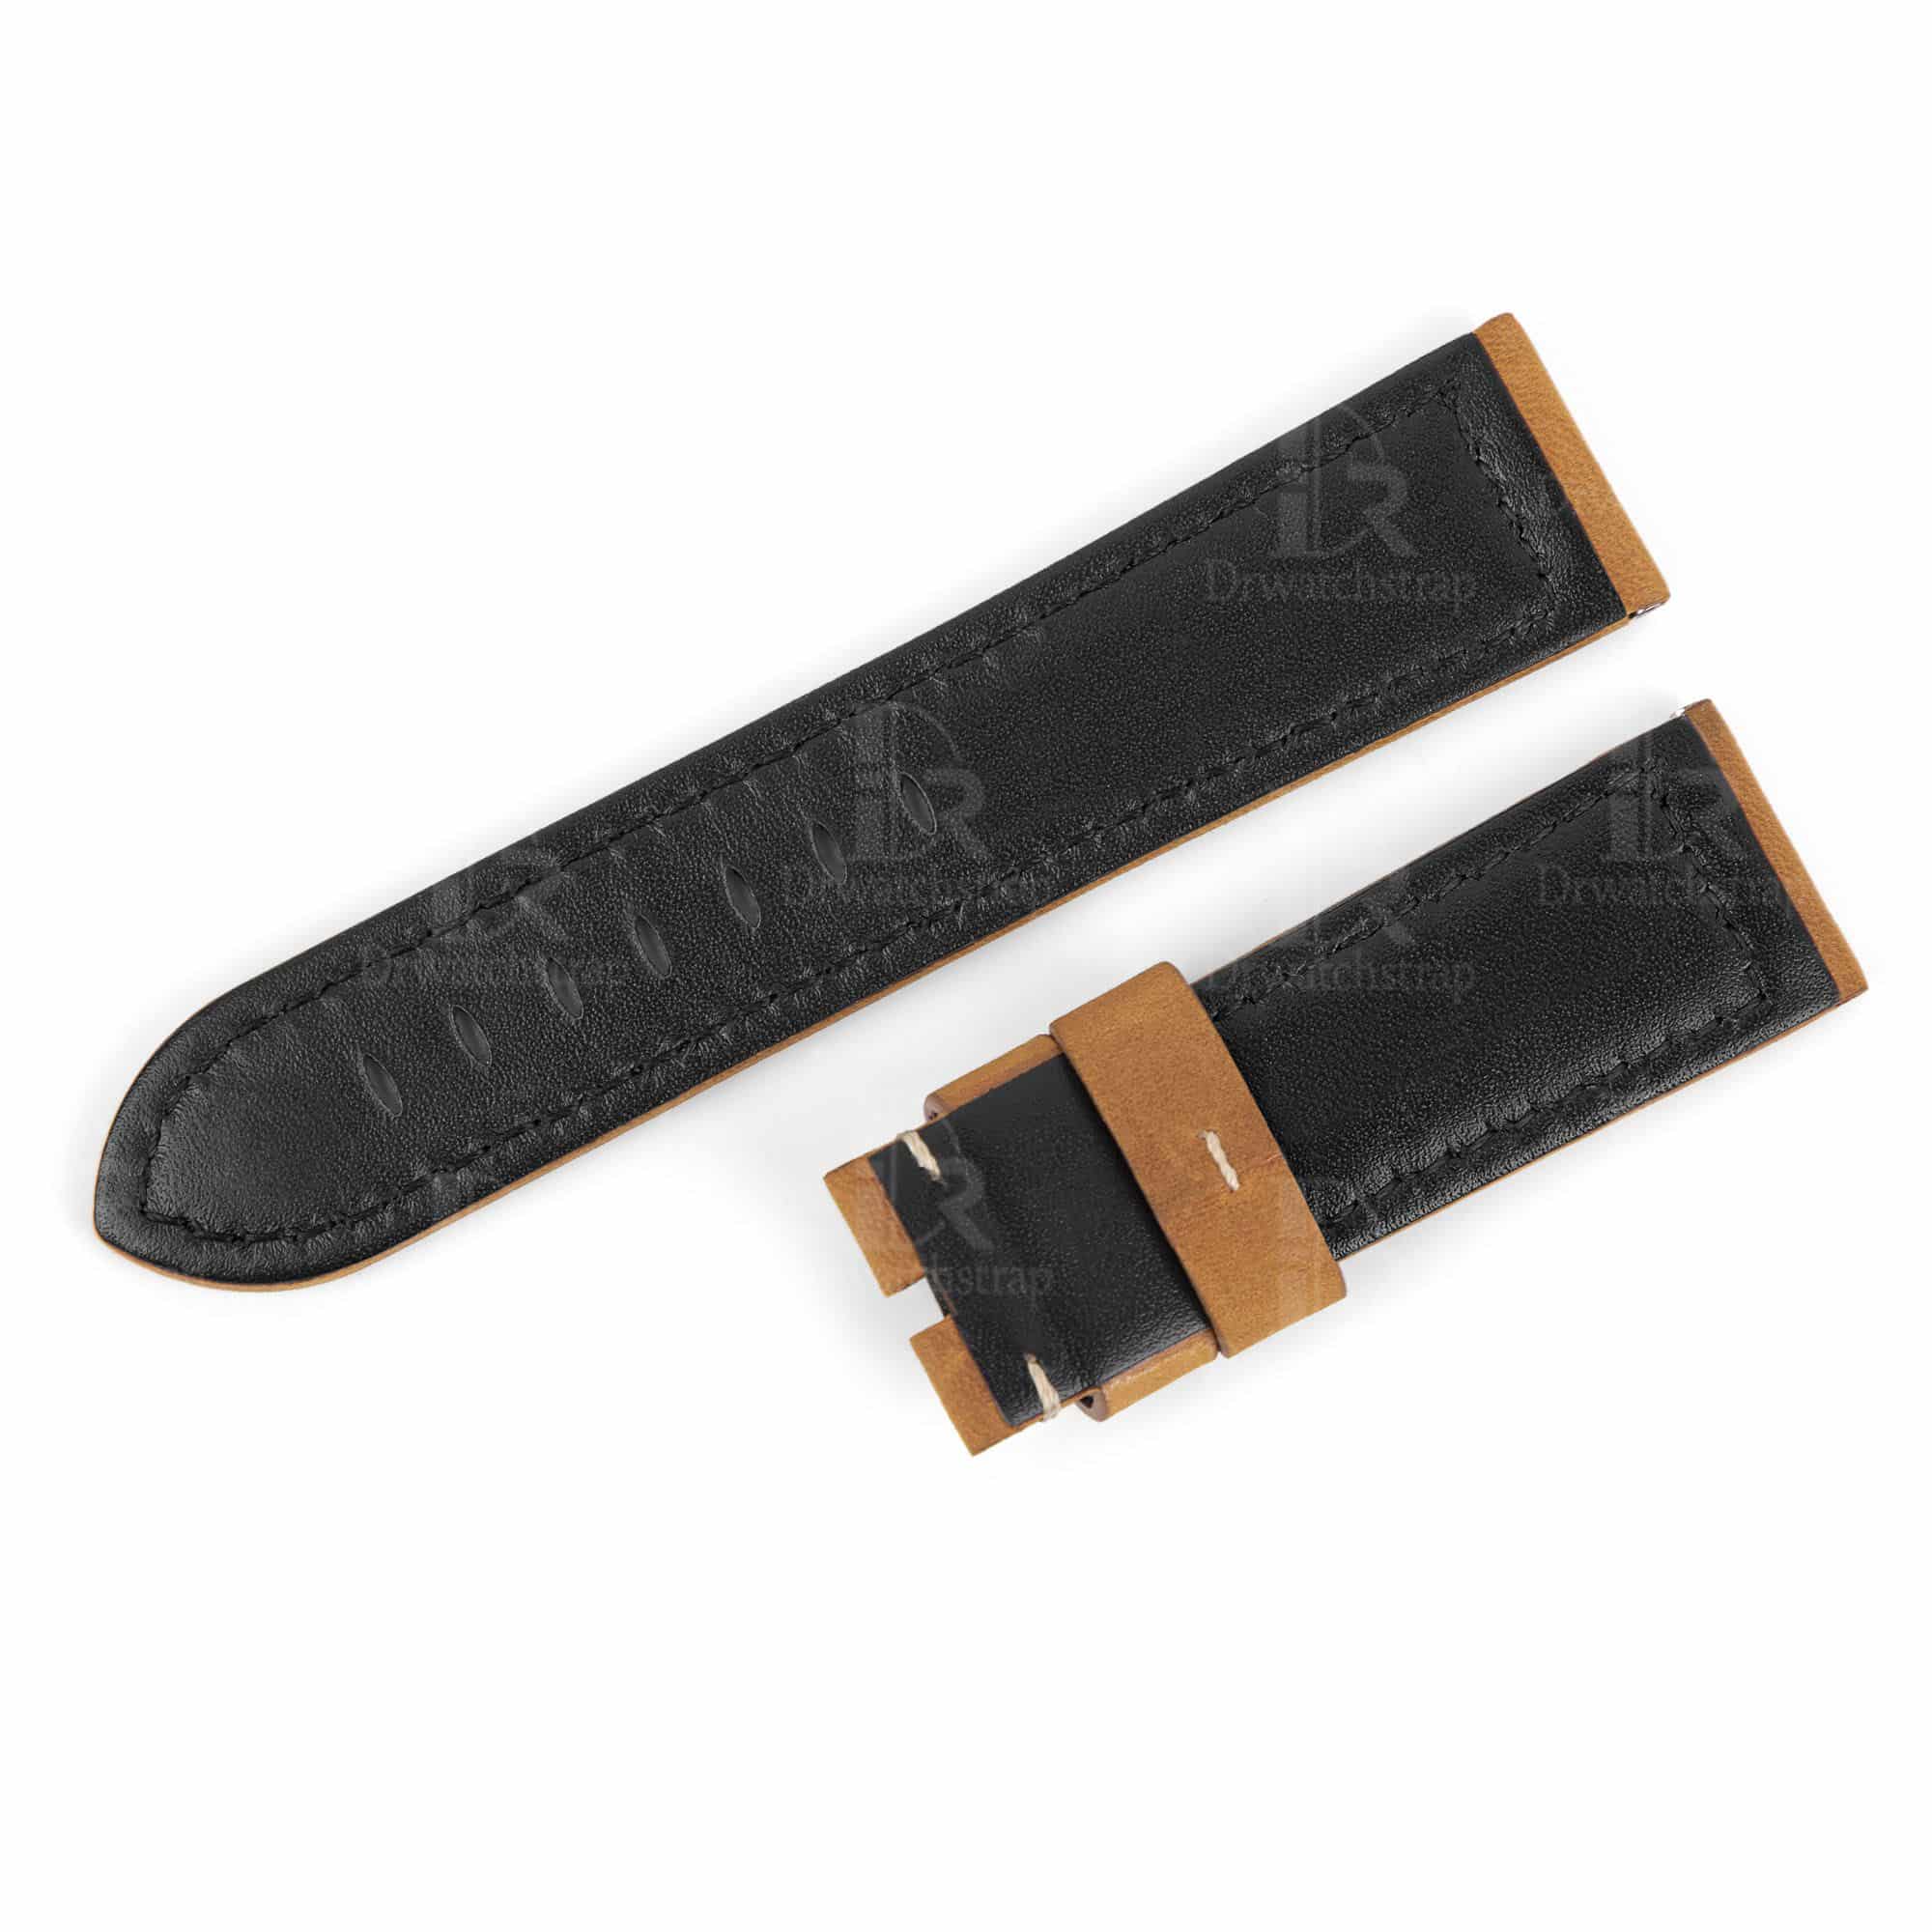 Premium custom best aftermarket calfskin material brown Panerai 22mm leather strap & watch band replacement OEM handmade for Panerai Luminor Radiomir luxury watches from DR Watchstrap online - Shop the wholesale and retail genuine calf leather watch straps and watchbands at a low price